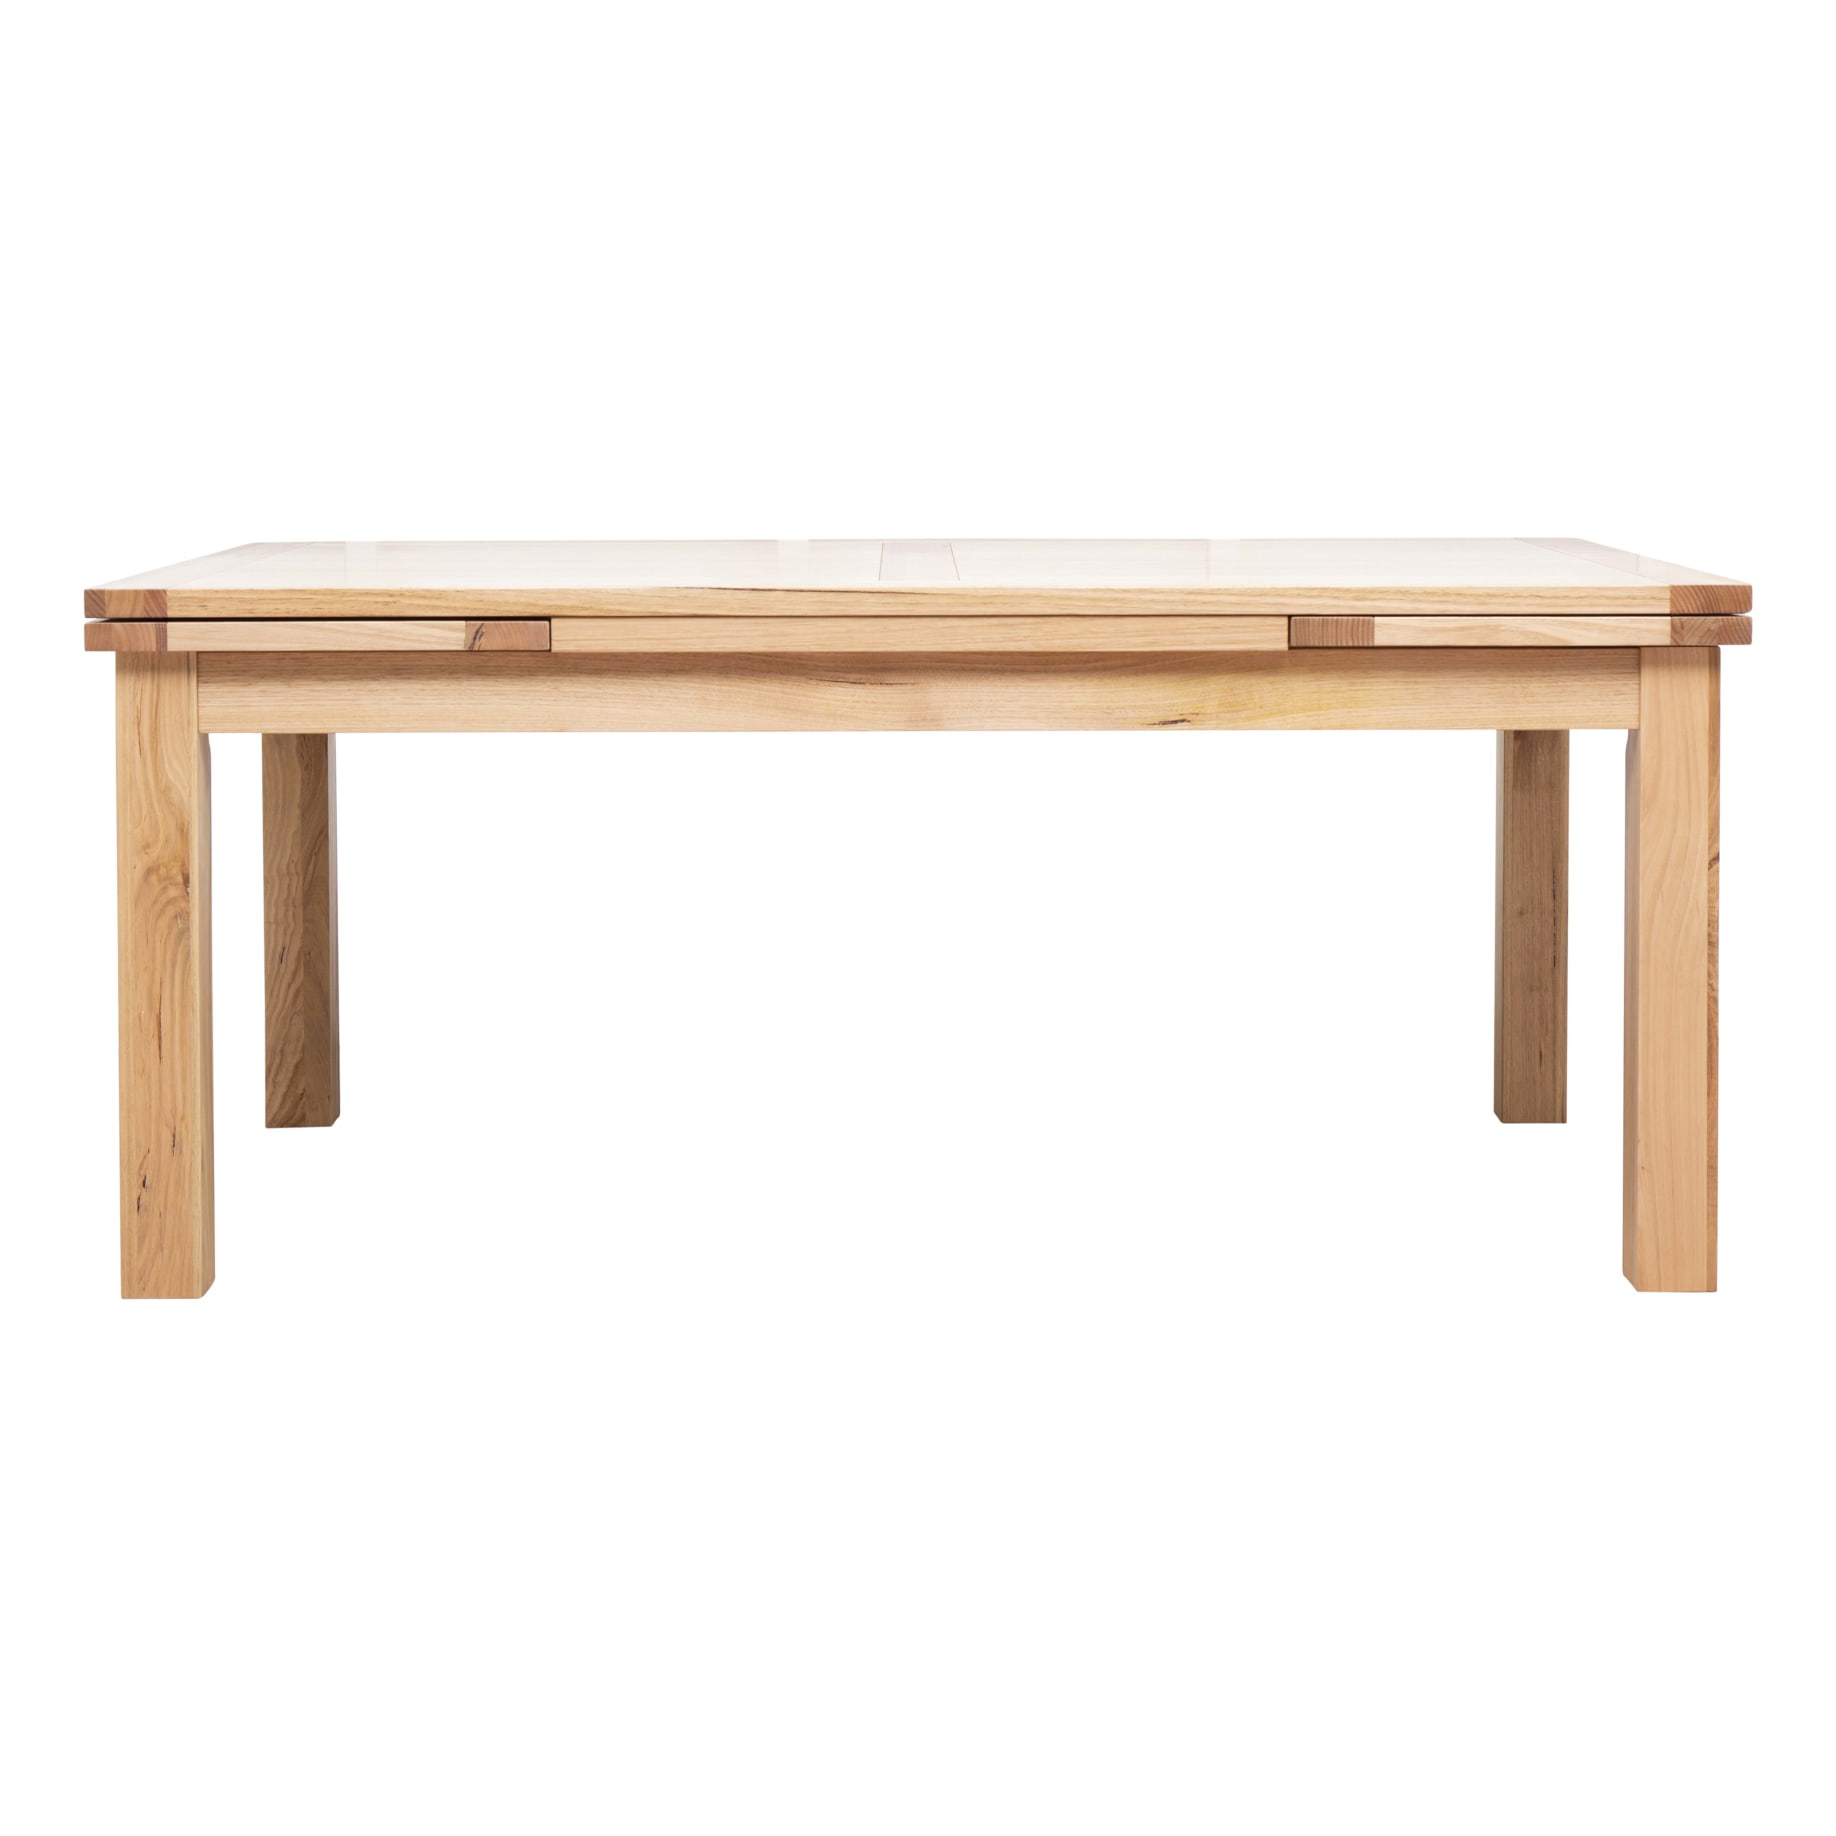 Derwent Ext. Dining Table 150-240cm in Messmate